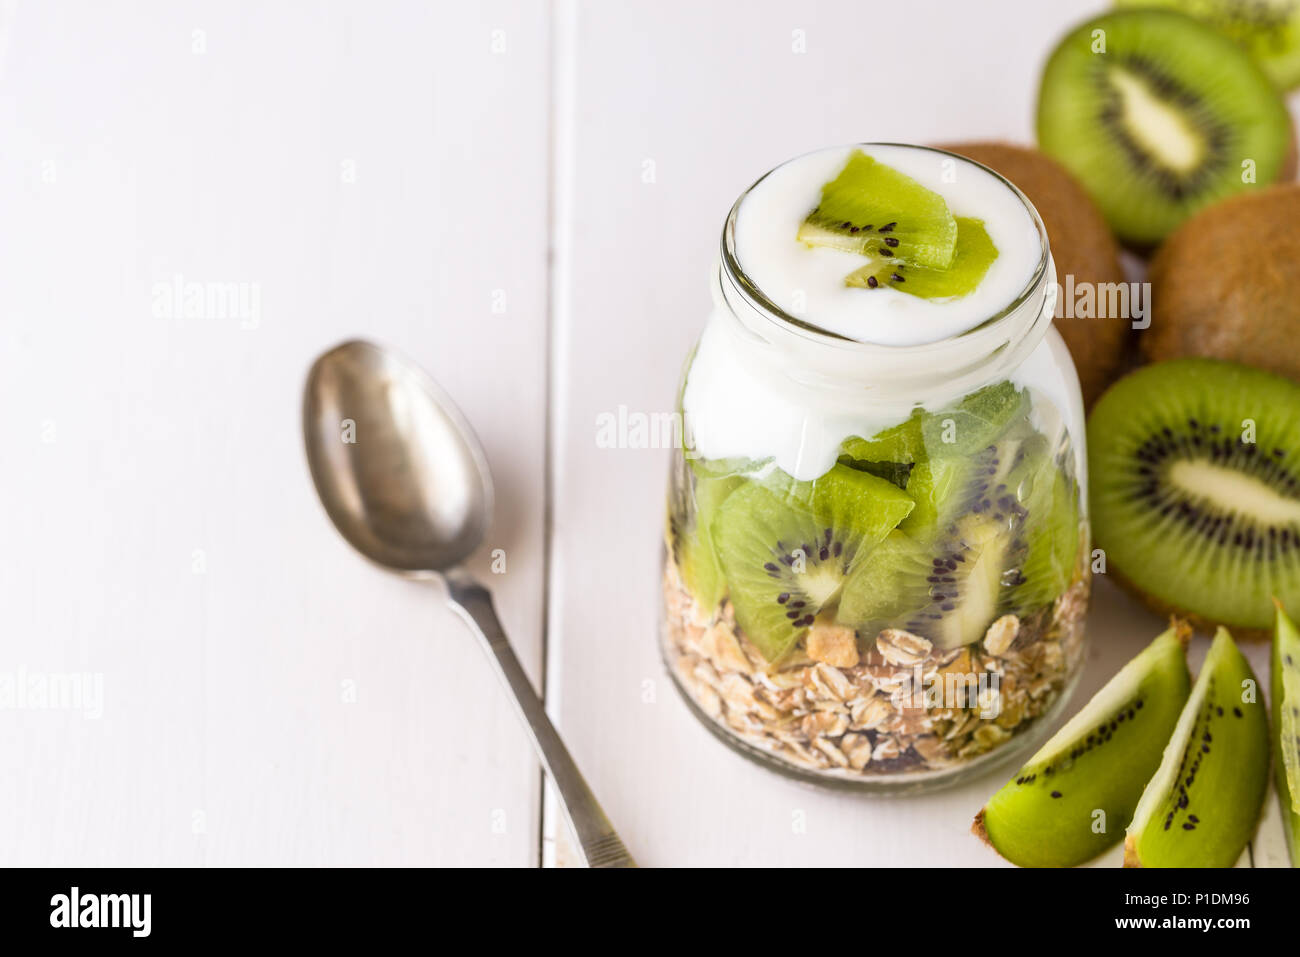 White yogurt with muesli in glass bowl with pieces of kiwi on top and whole pieces on the right side. Stock Photo